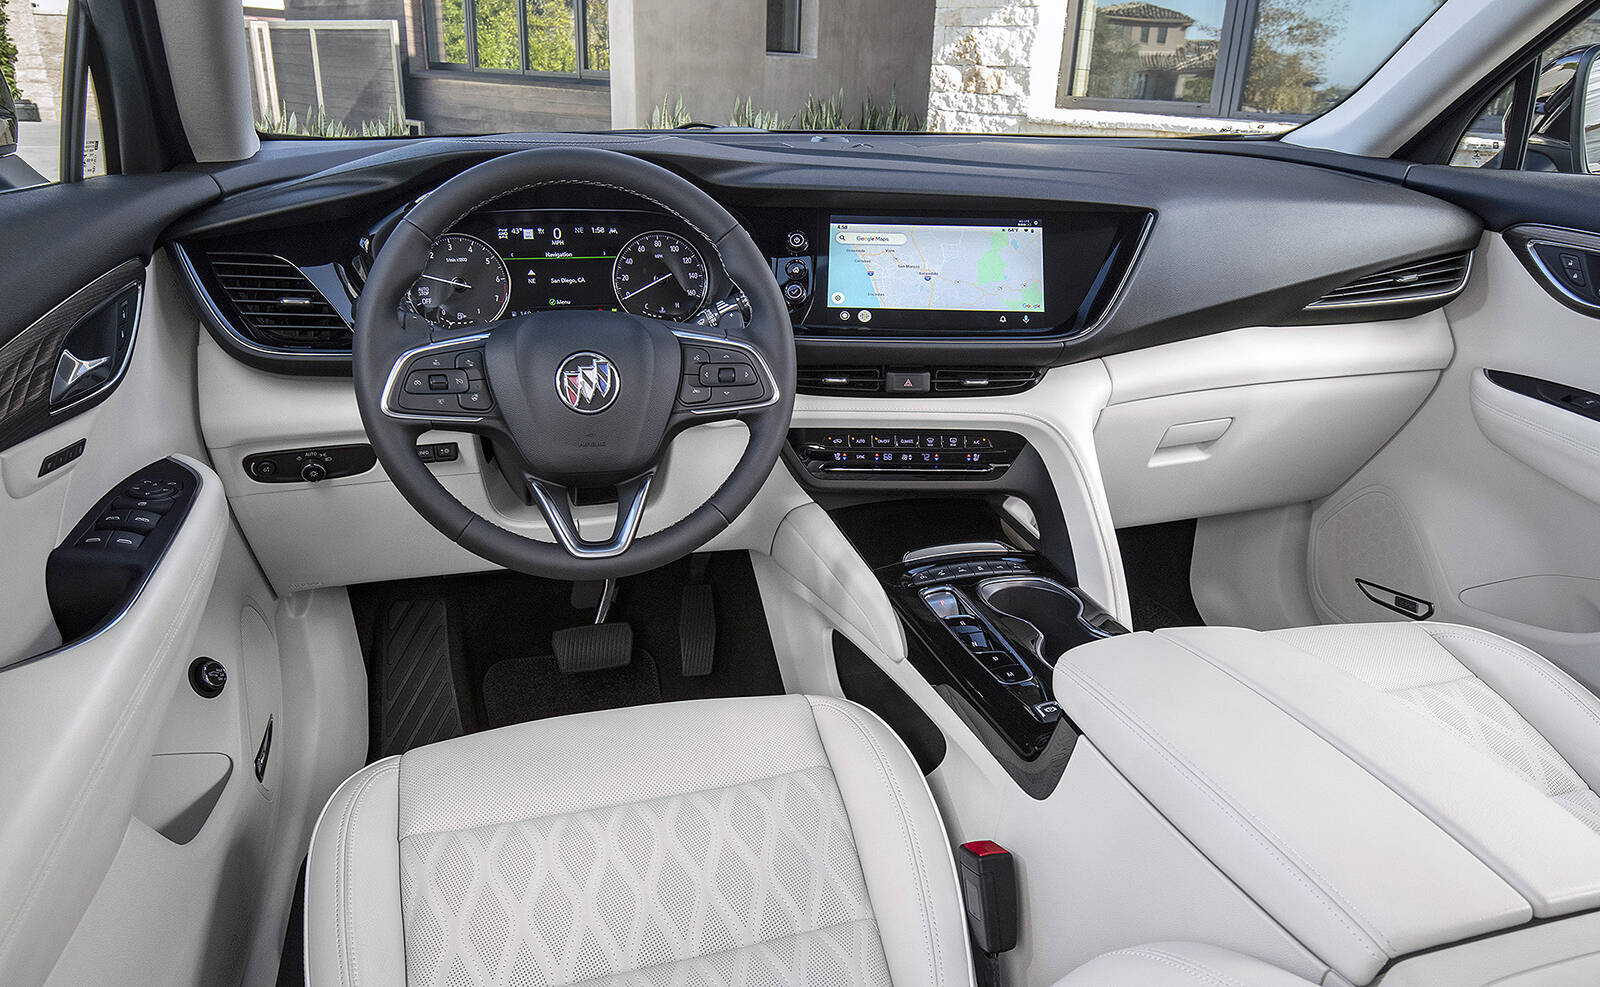 The redesigned interior replaces the shifter handle with a row of buttons, and the touch-screens are more neatly integrated into the dash. This is the inside of the new Avenir trim, but its similar to that of the lower trims. PHOTO: GENERAL MOTORS